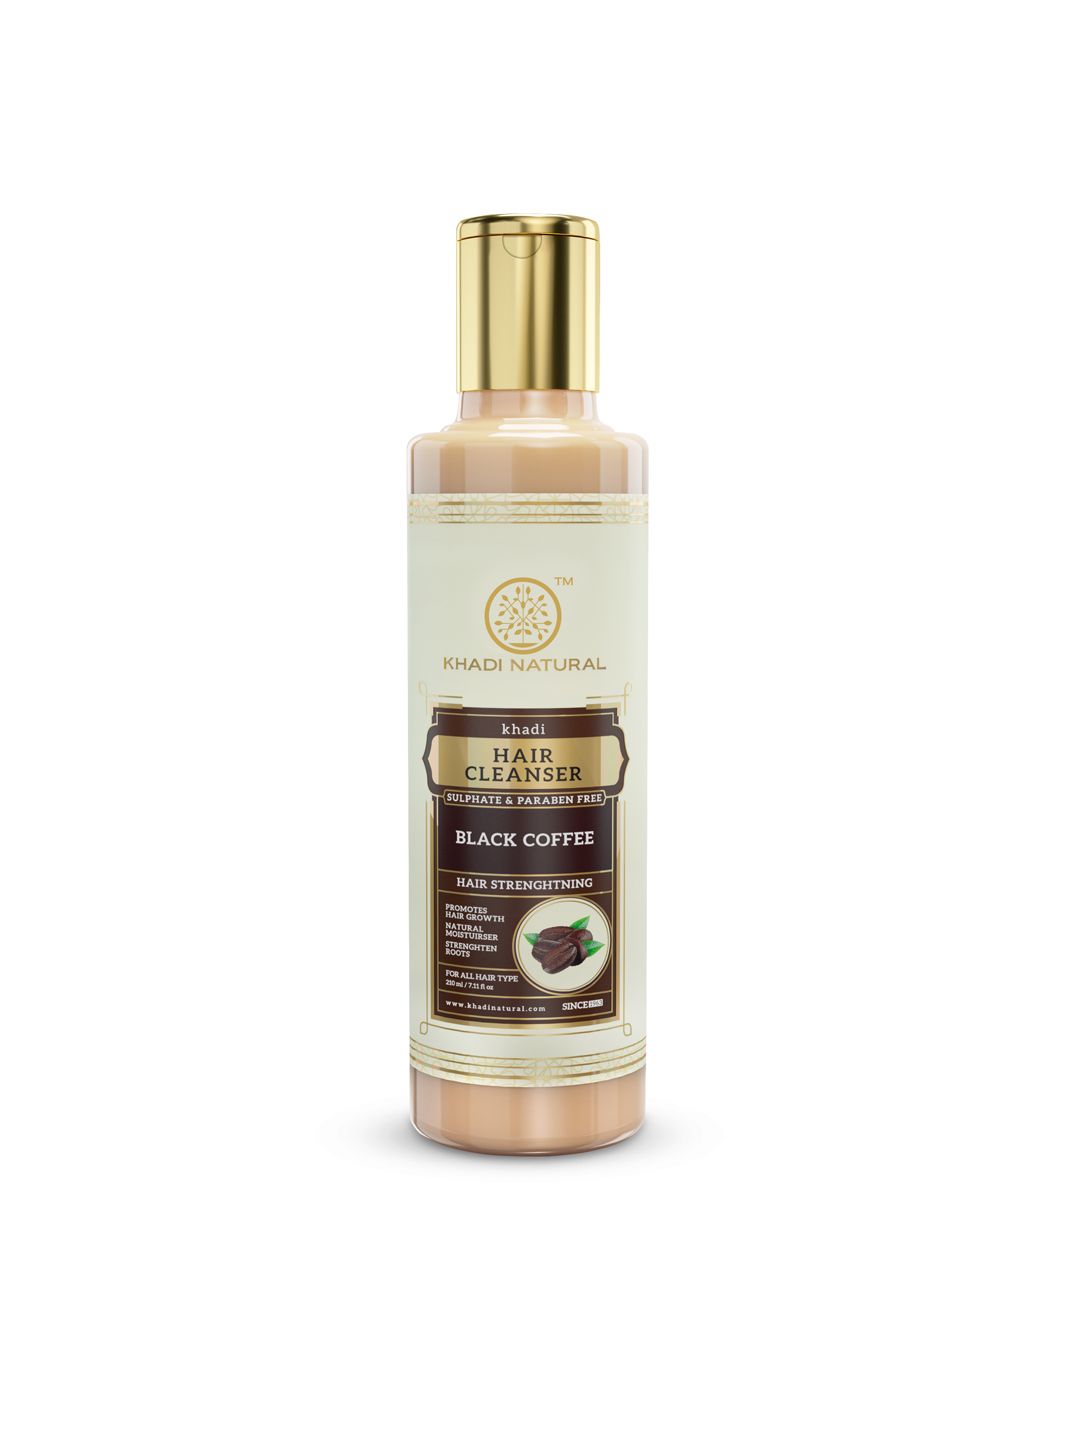 Khadi Natural Black Coffee Sulphate & Paraben Free Hair Cleanser - 210ml Price in India